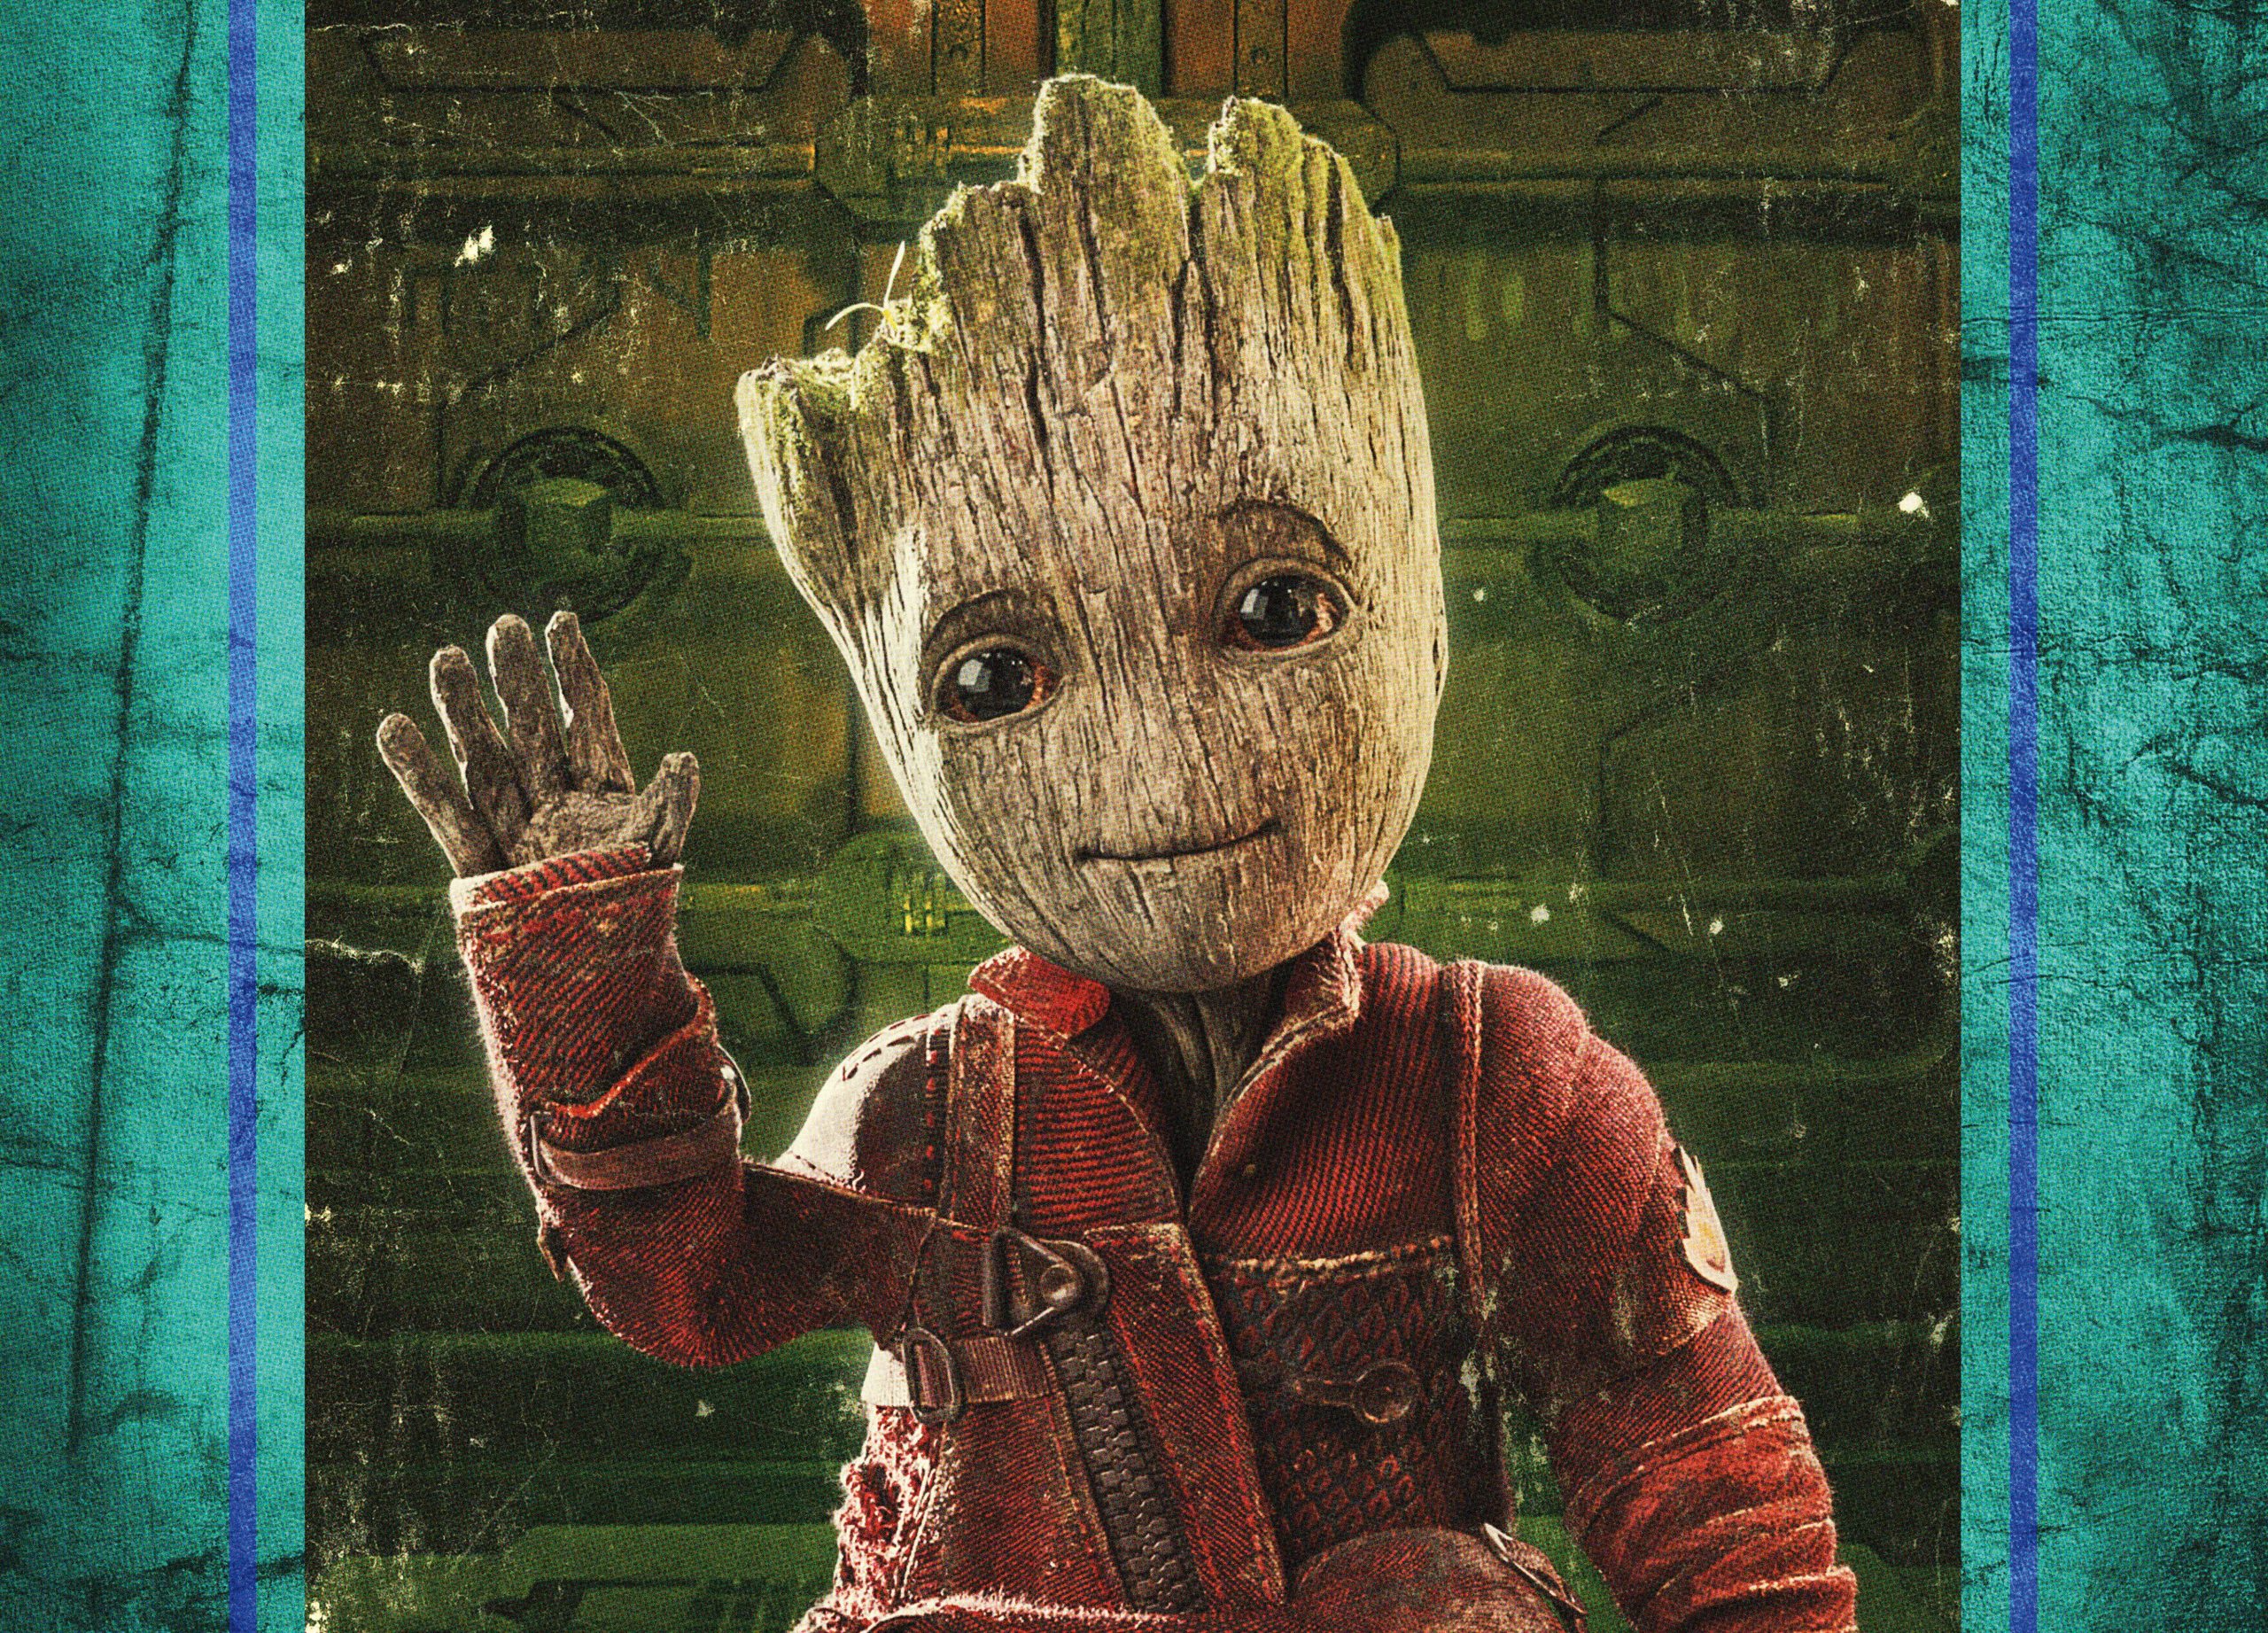 Cute Baby Groot Guardians Of The Galaxy Wallpaper Hd, Cute Baby Groot Guardians Of The Galaxy, Movies